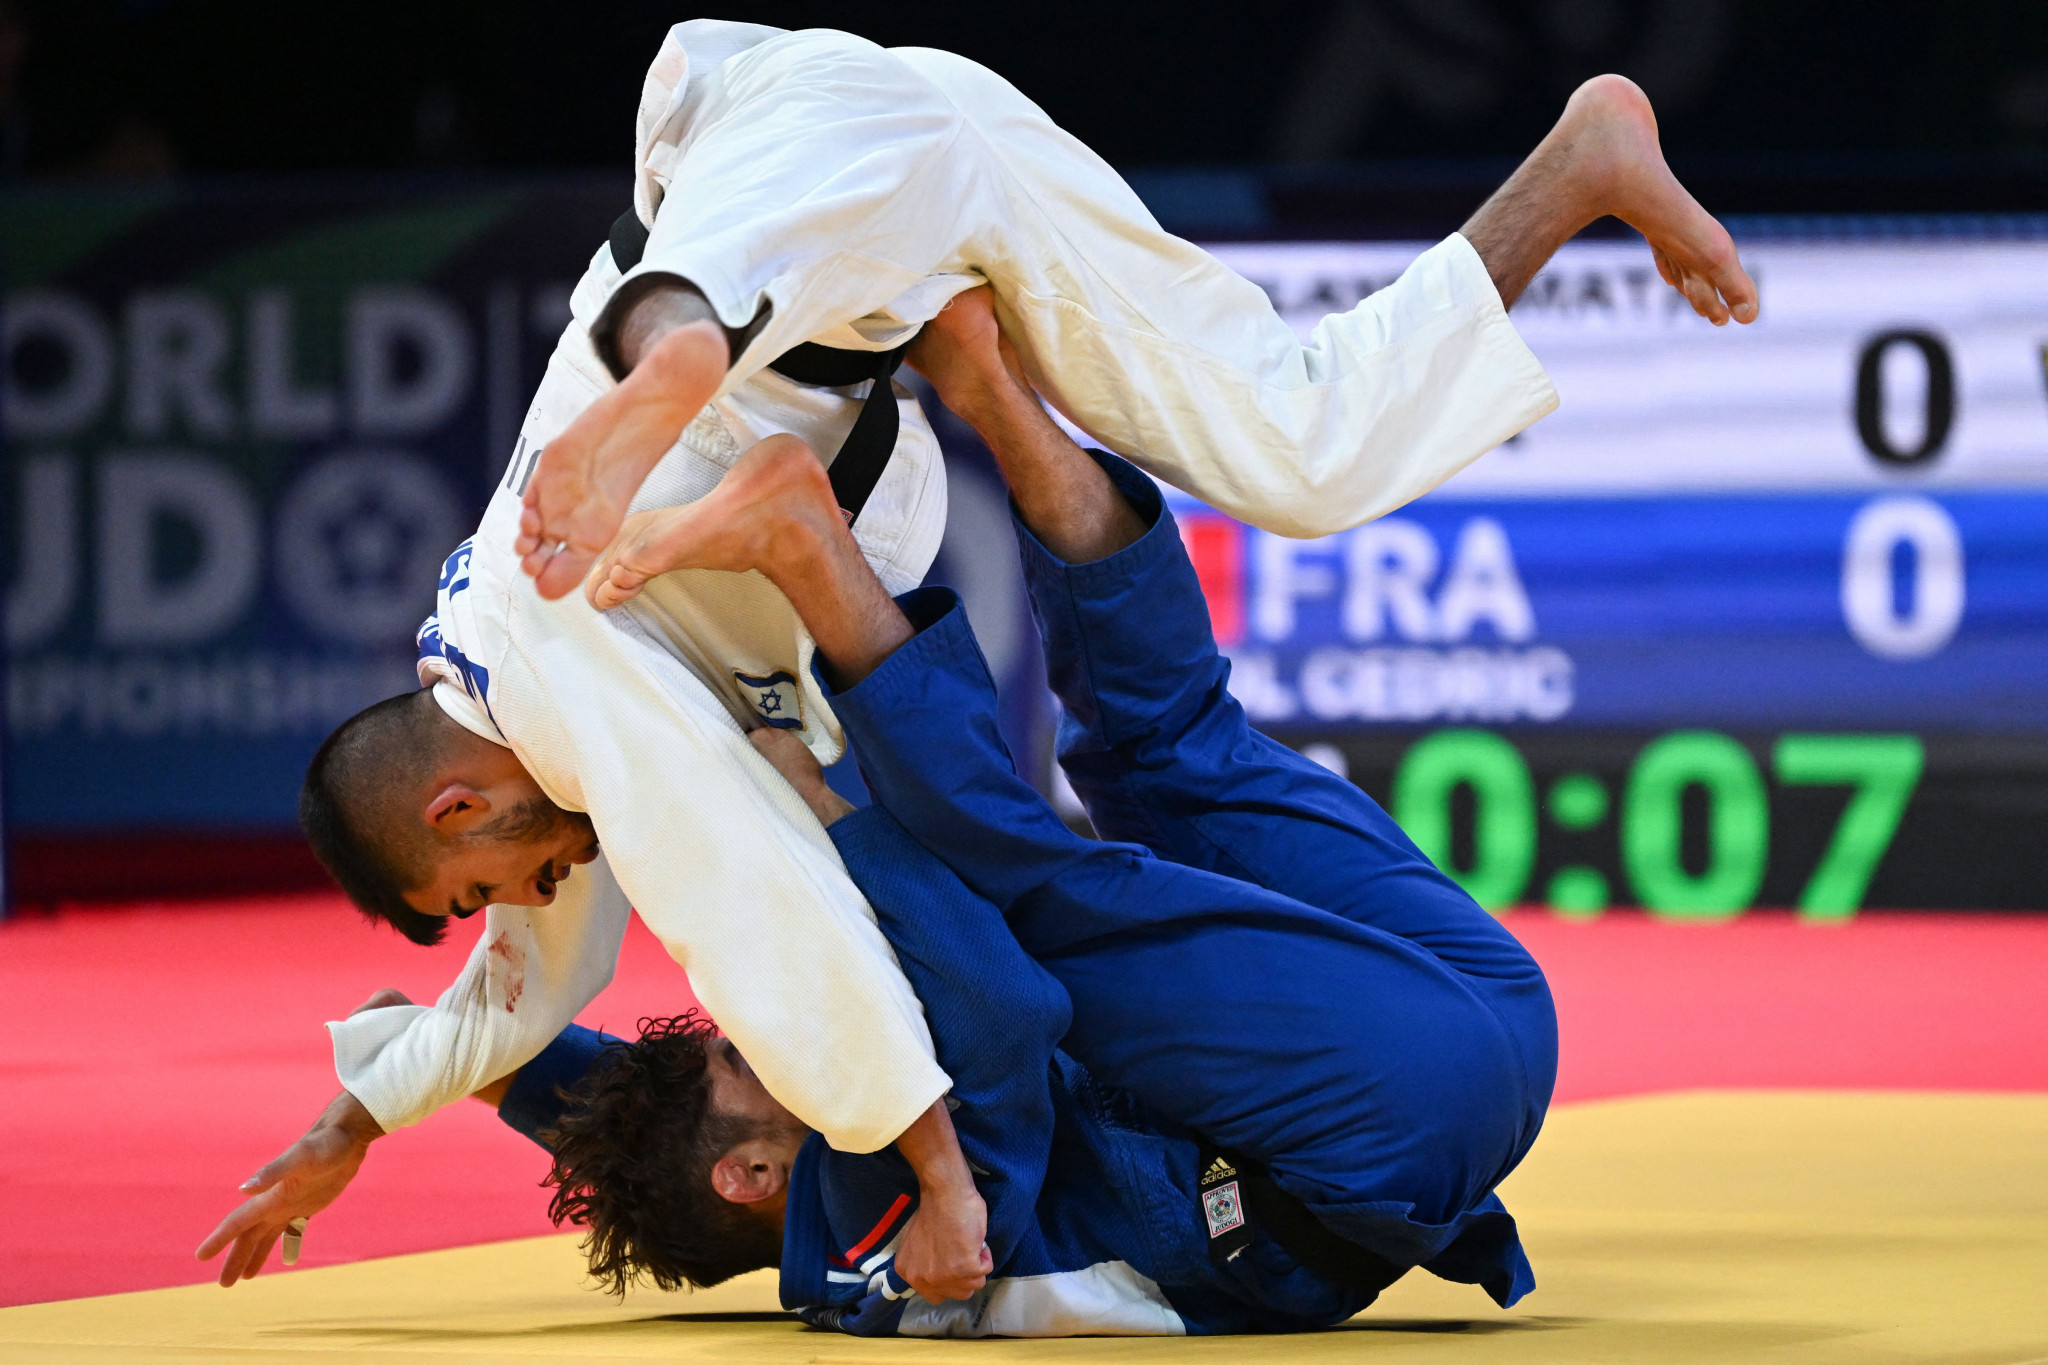 Frenchman Cedric Revol, in blue, was unable to build on his European bronze medal from last year as he was subjected to a first-bout loss to Matan Kokolayev of Israel in the men's under-60kg tournament ©Getty Images